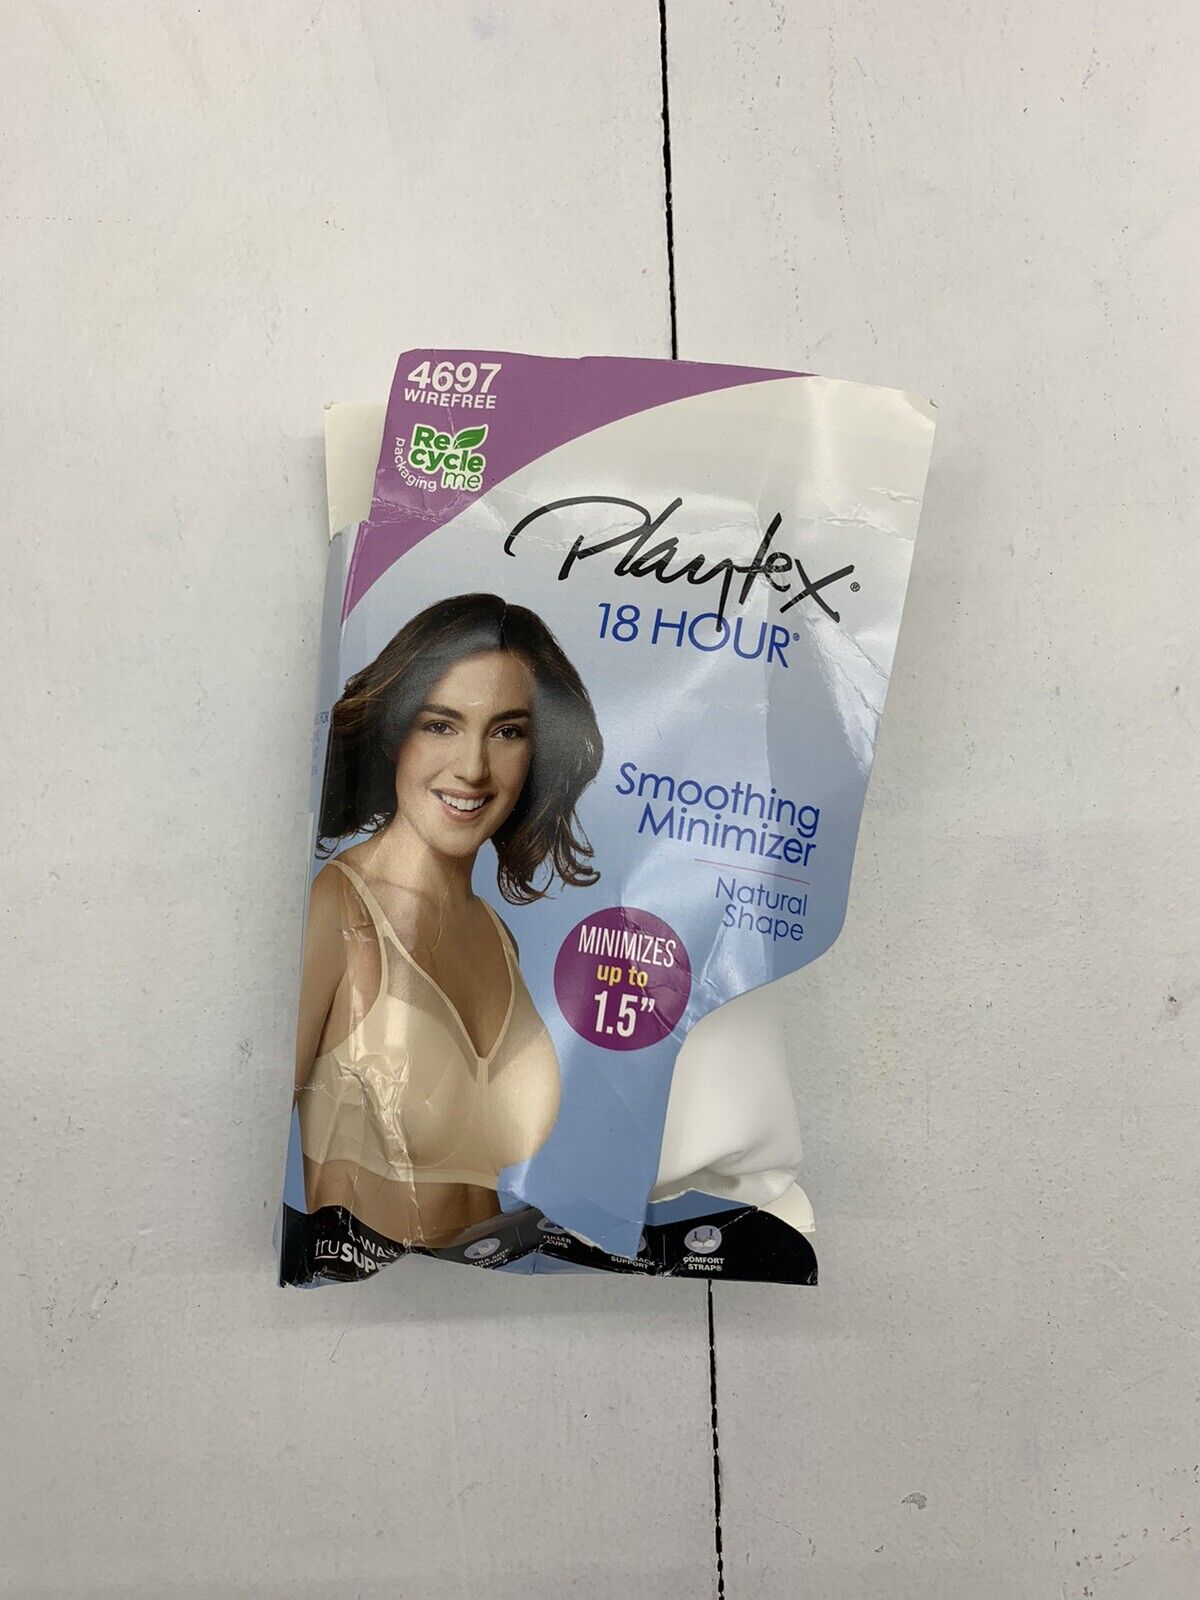  Playtex Womens 18 Hour Smoothing Minimizer Wirefree